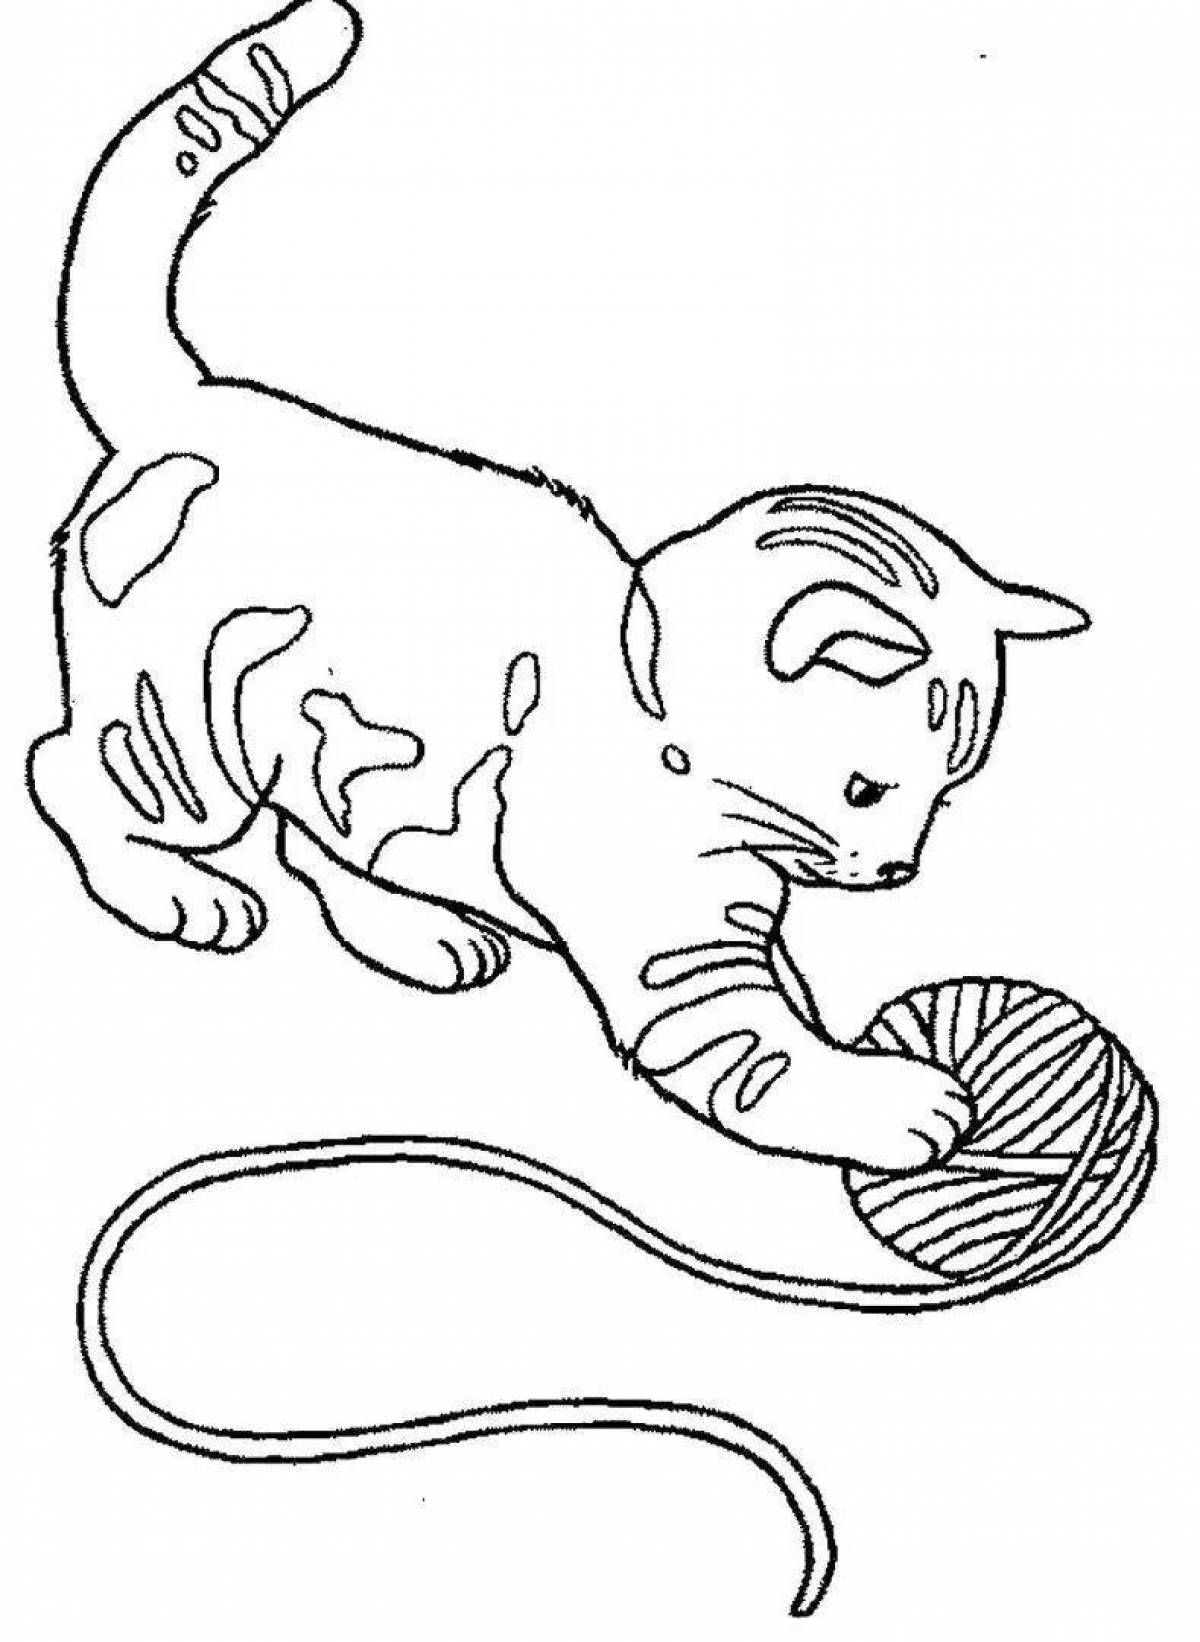 Witty kitty coloring games